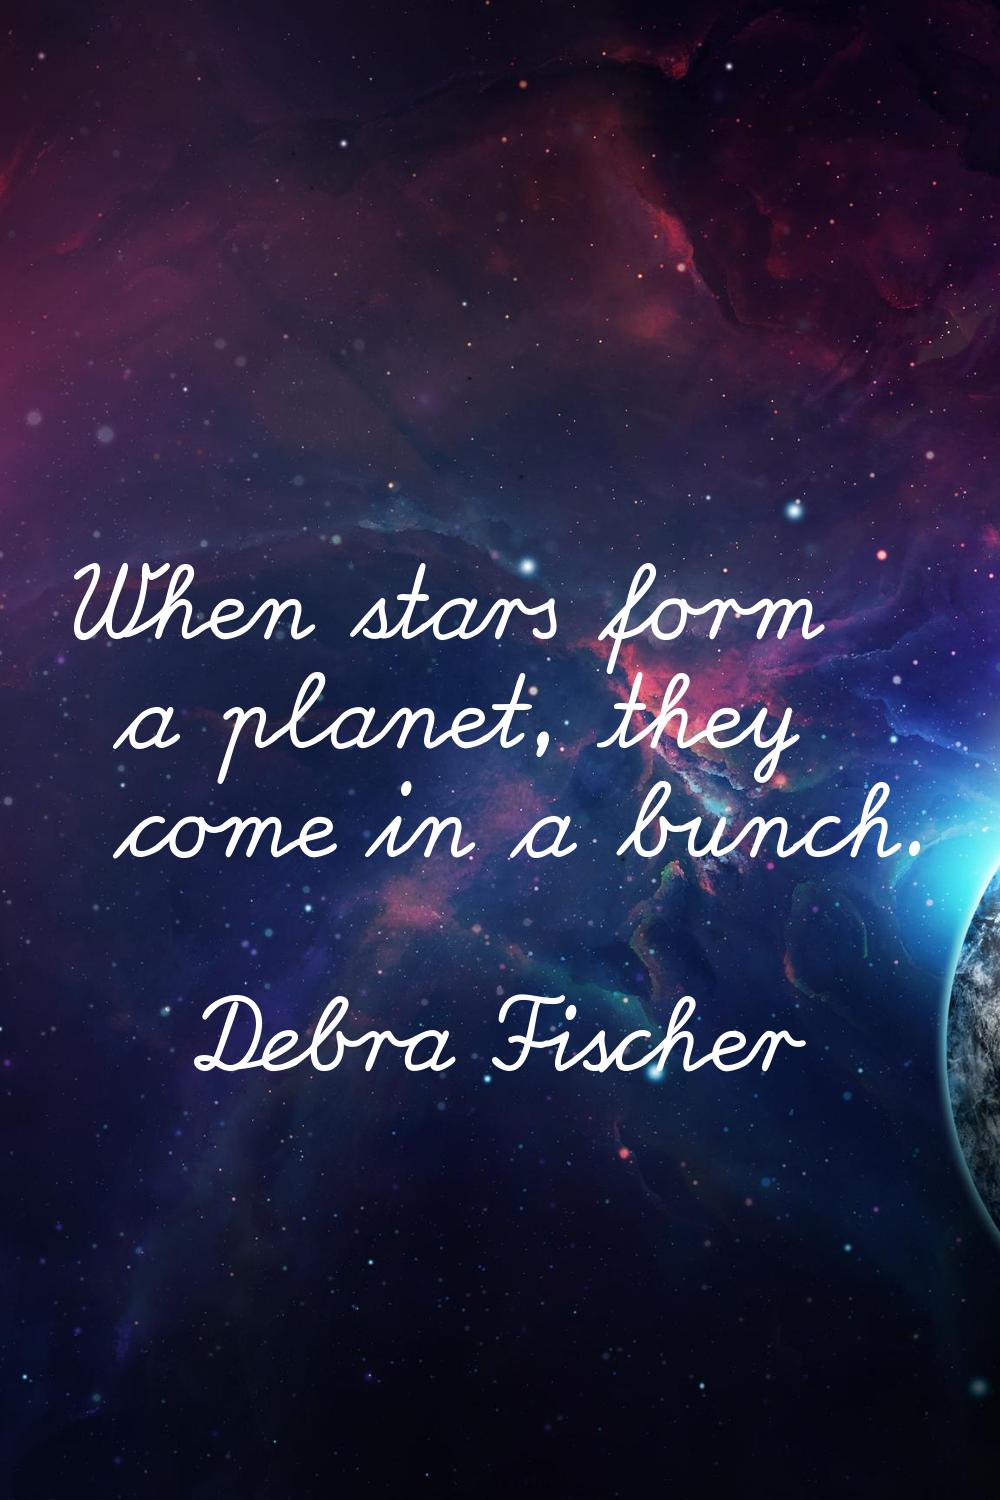 When stars form a planet, they come in a bunch.